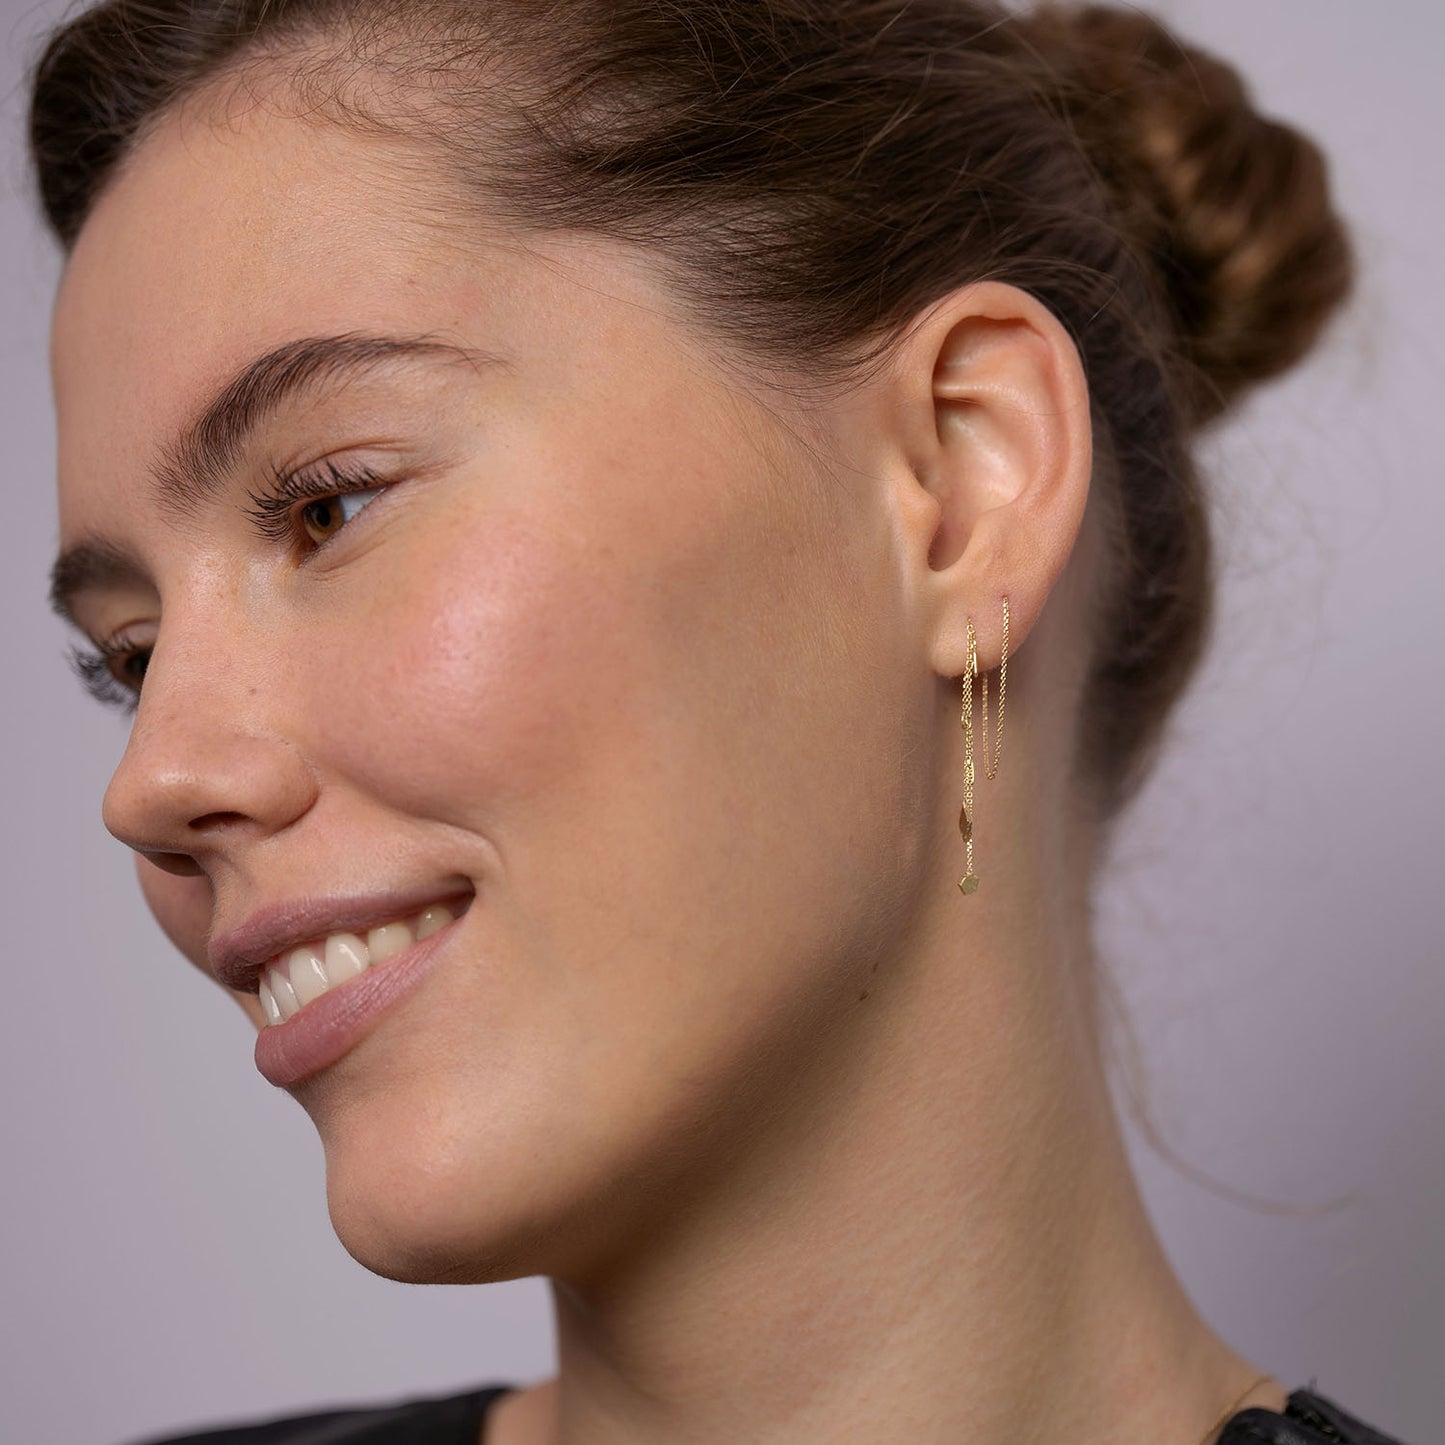 18ct Gold thread through earrings with mixed gold shaped and chains on model